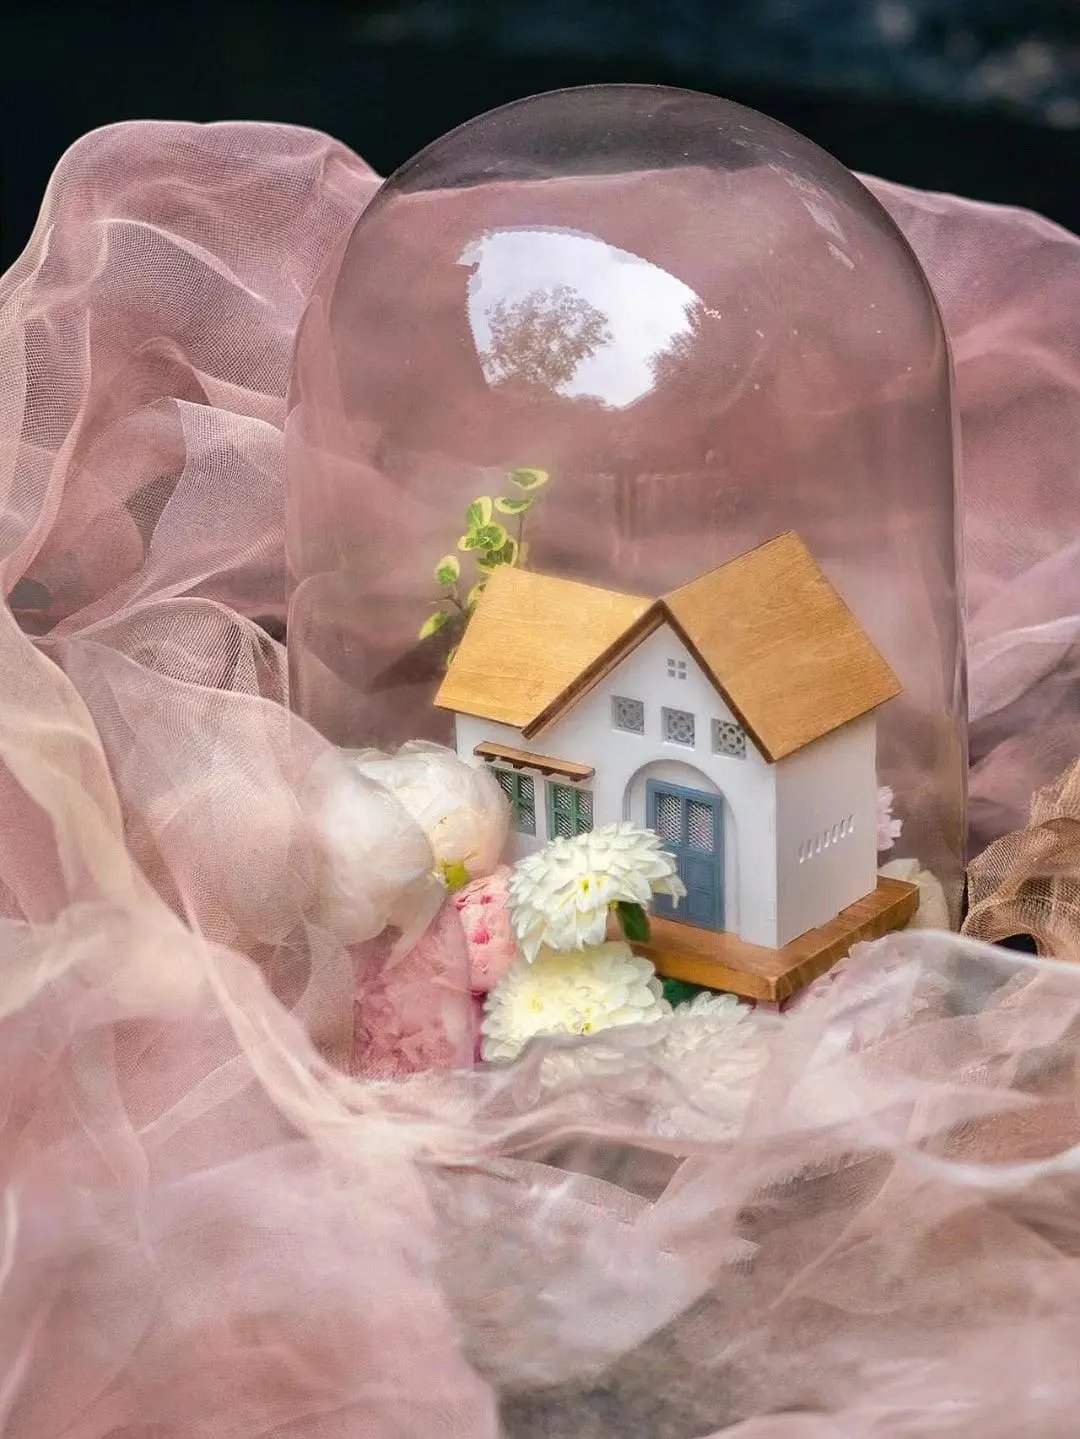 a house in a glass dome with flowers inside